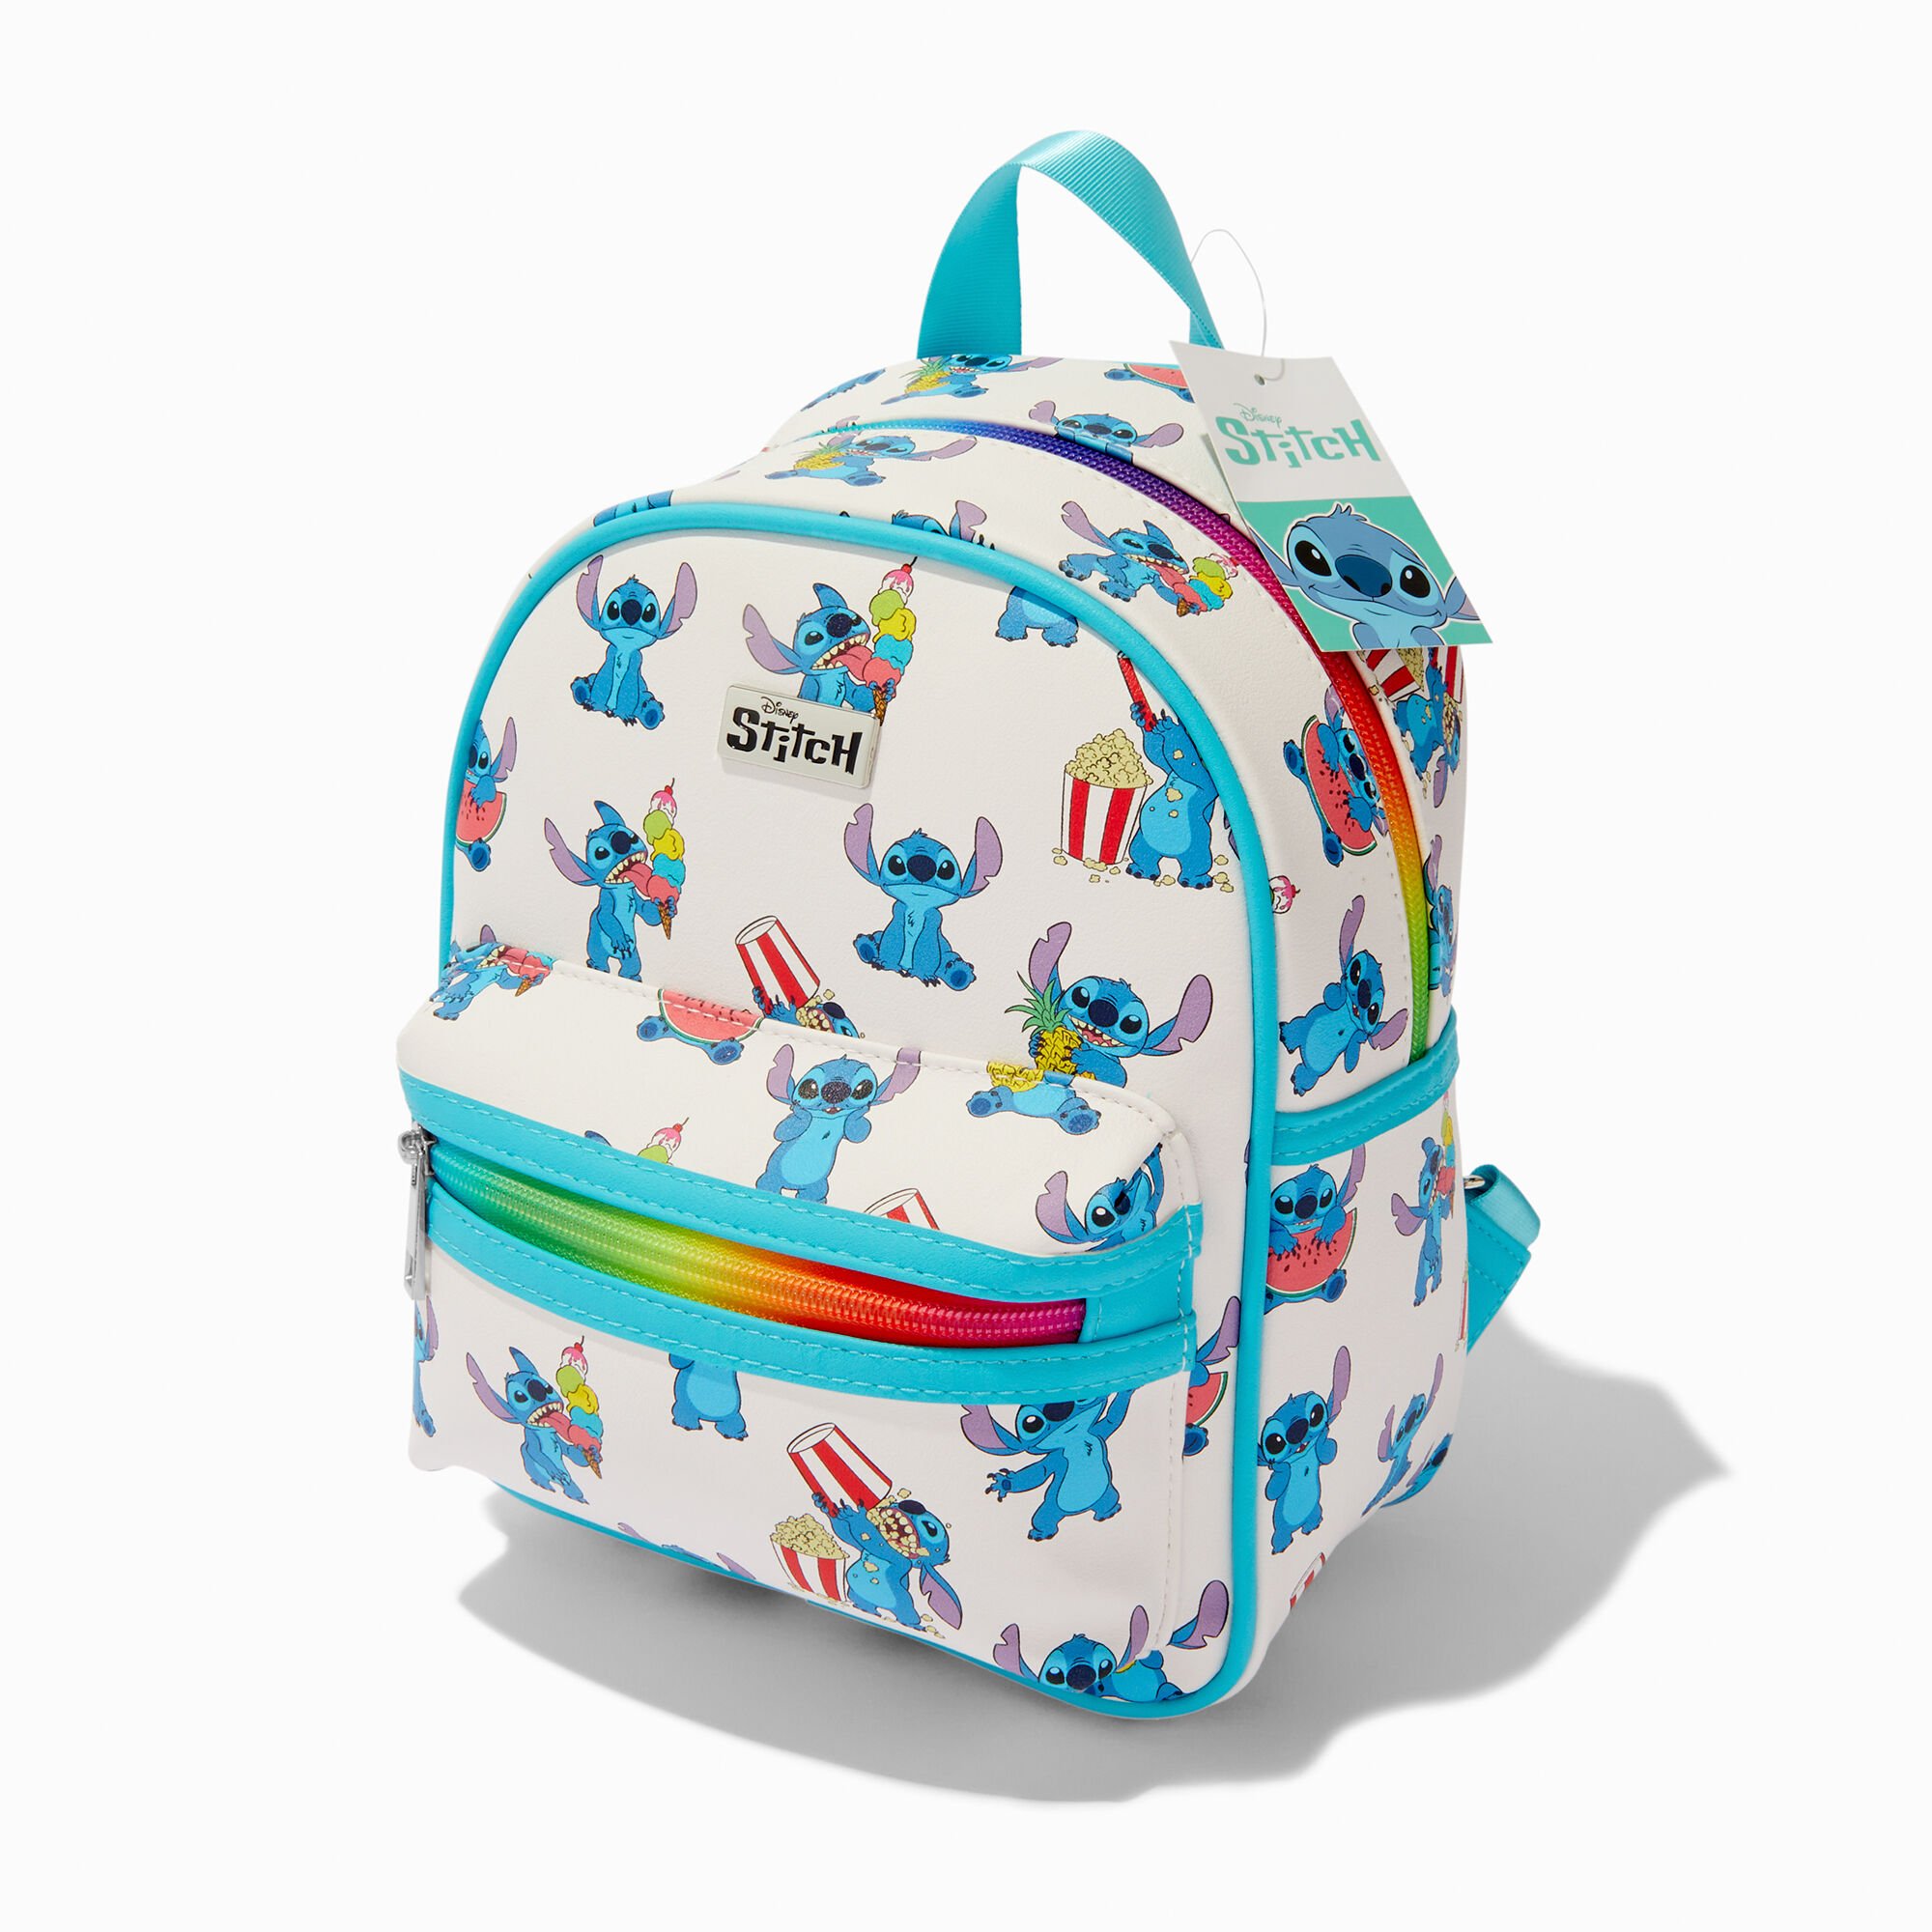 View Disney Stitch Claires Exclusive Foodie Mini Backpack information